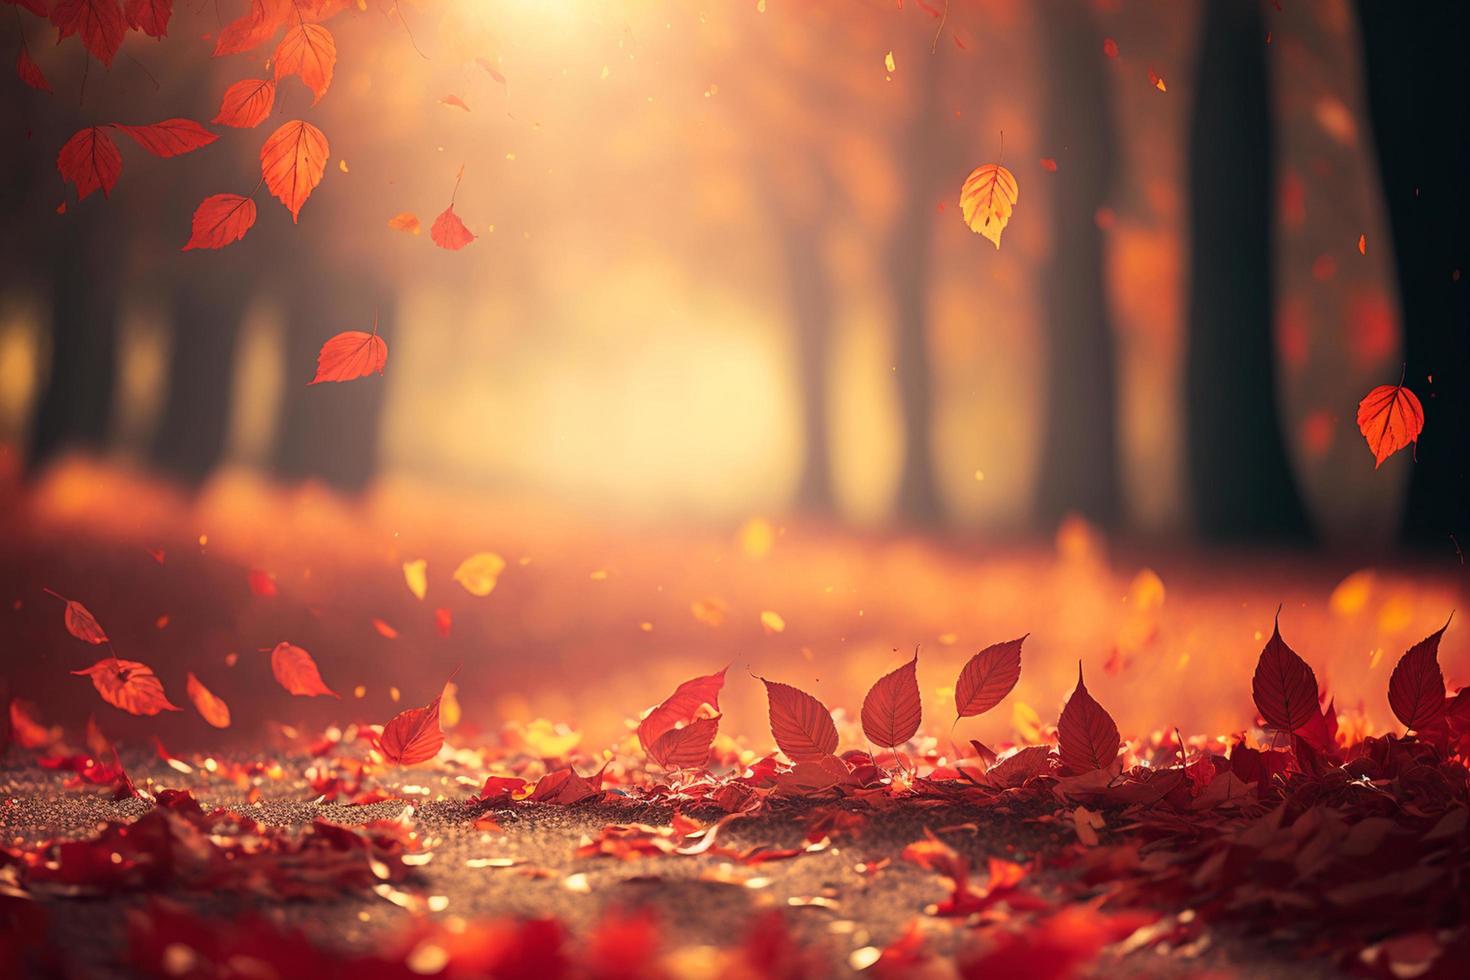 Red Leaves Falling In Forest, Defocused Autumn Background With Sunlight photo